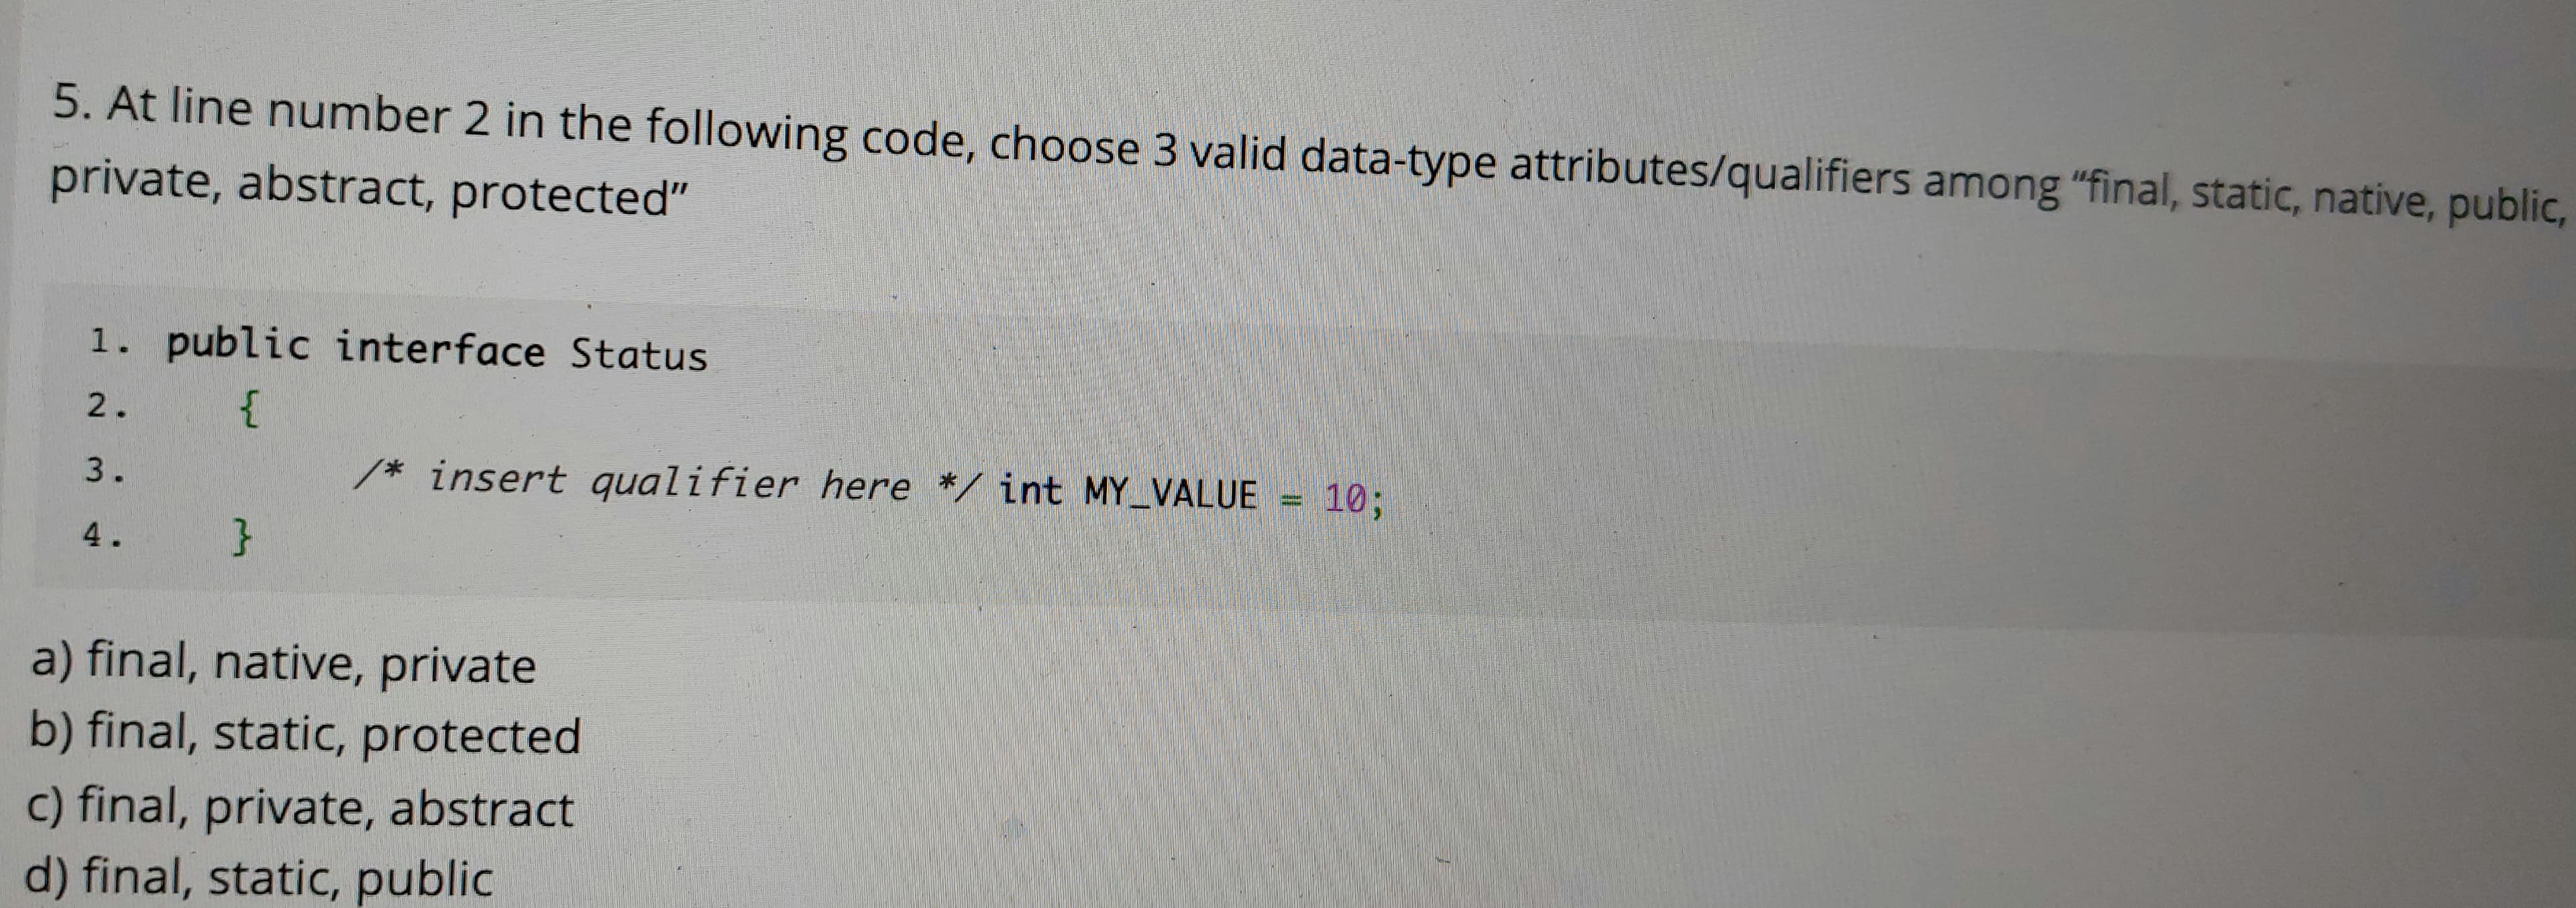 5. At line number 2 in the following code, choose 3 valid data-type attributes/qualifiers among "final, static, native, public,
private, abstract, protected"
1. public interface Status
2.
{
3.
/* insert qualifier here */ int MY_VALUE = 10;
4.
}
a) final, native, private
b) final, static, protected
c) final, private, abstract
d) final, static, public
